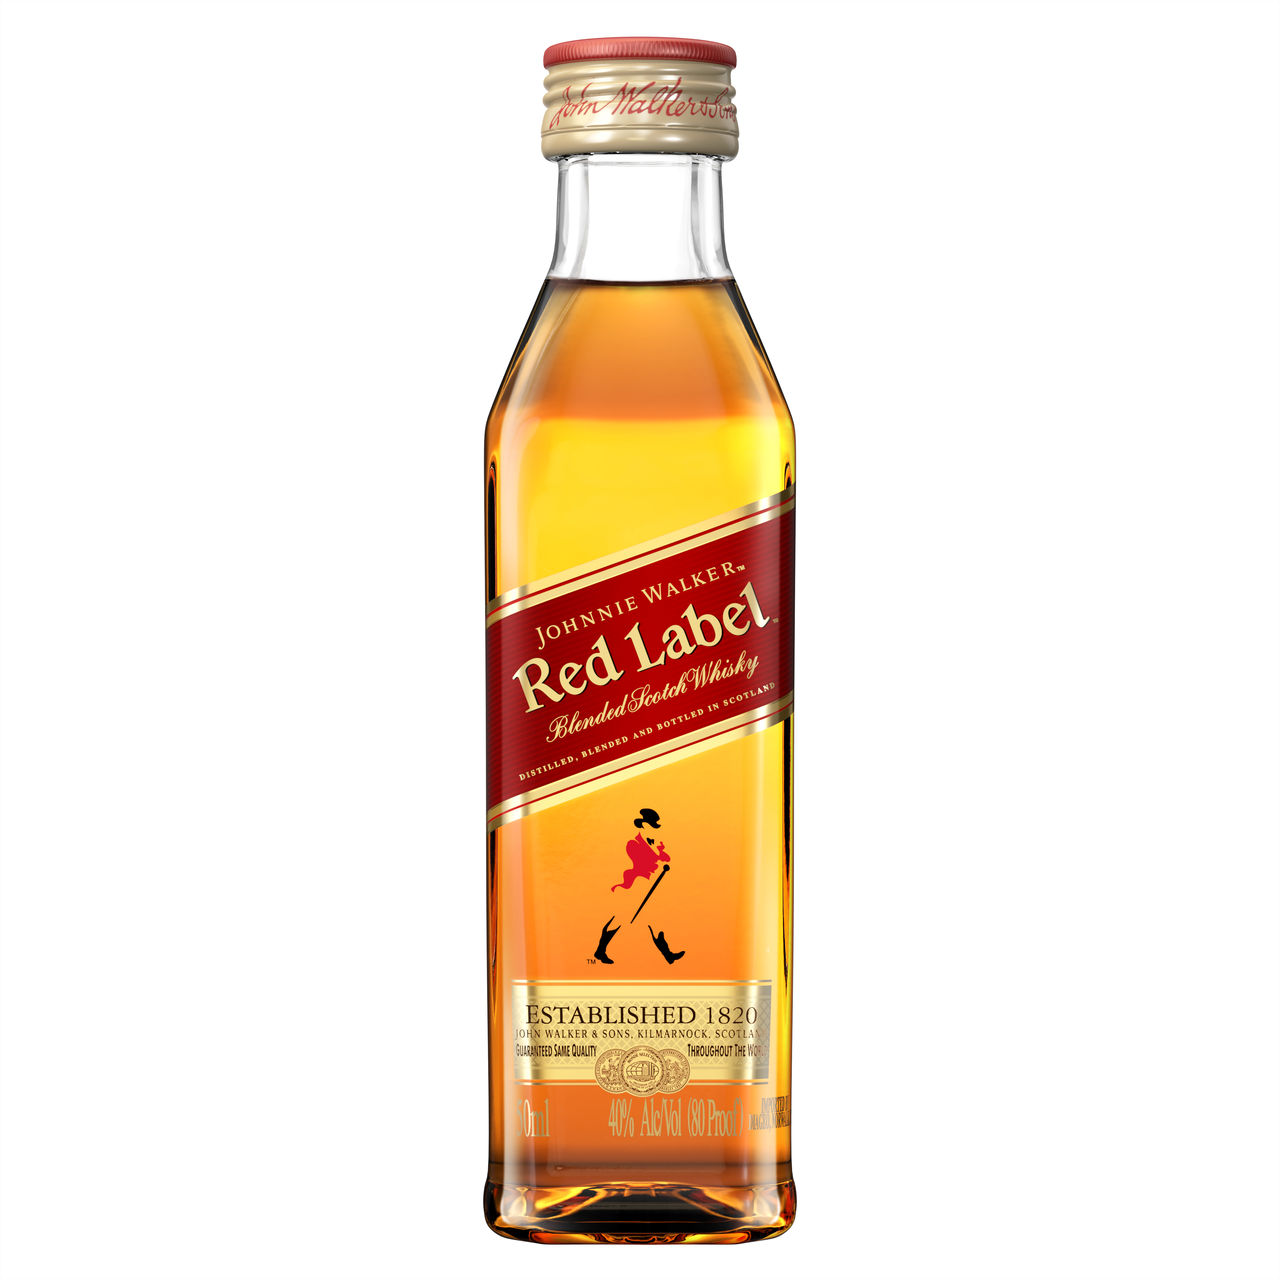 Сколько стоит лейбл. Johnnie Walker Red Label 0.05 л. Виски Джонни Уокер ред лейбл 0.5. Johnnie Walker Red Label Blended Scotch Whisky. Johnny Walker Red Label 0.5.